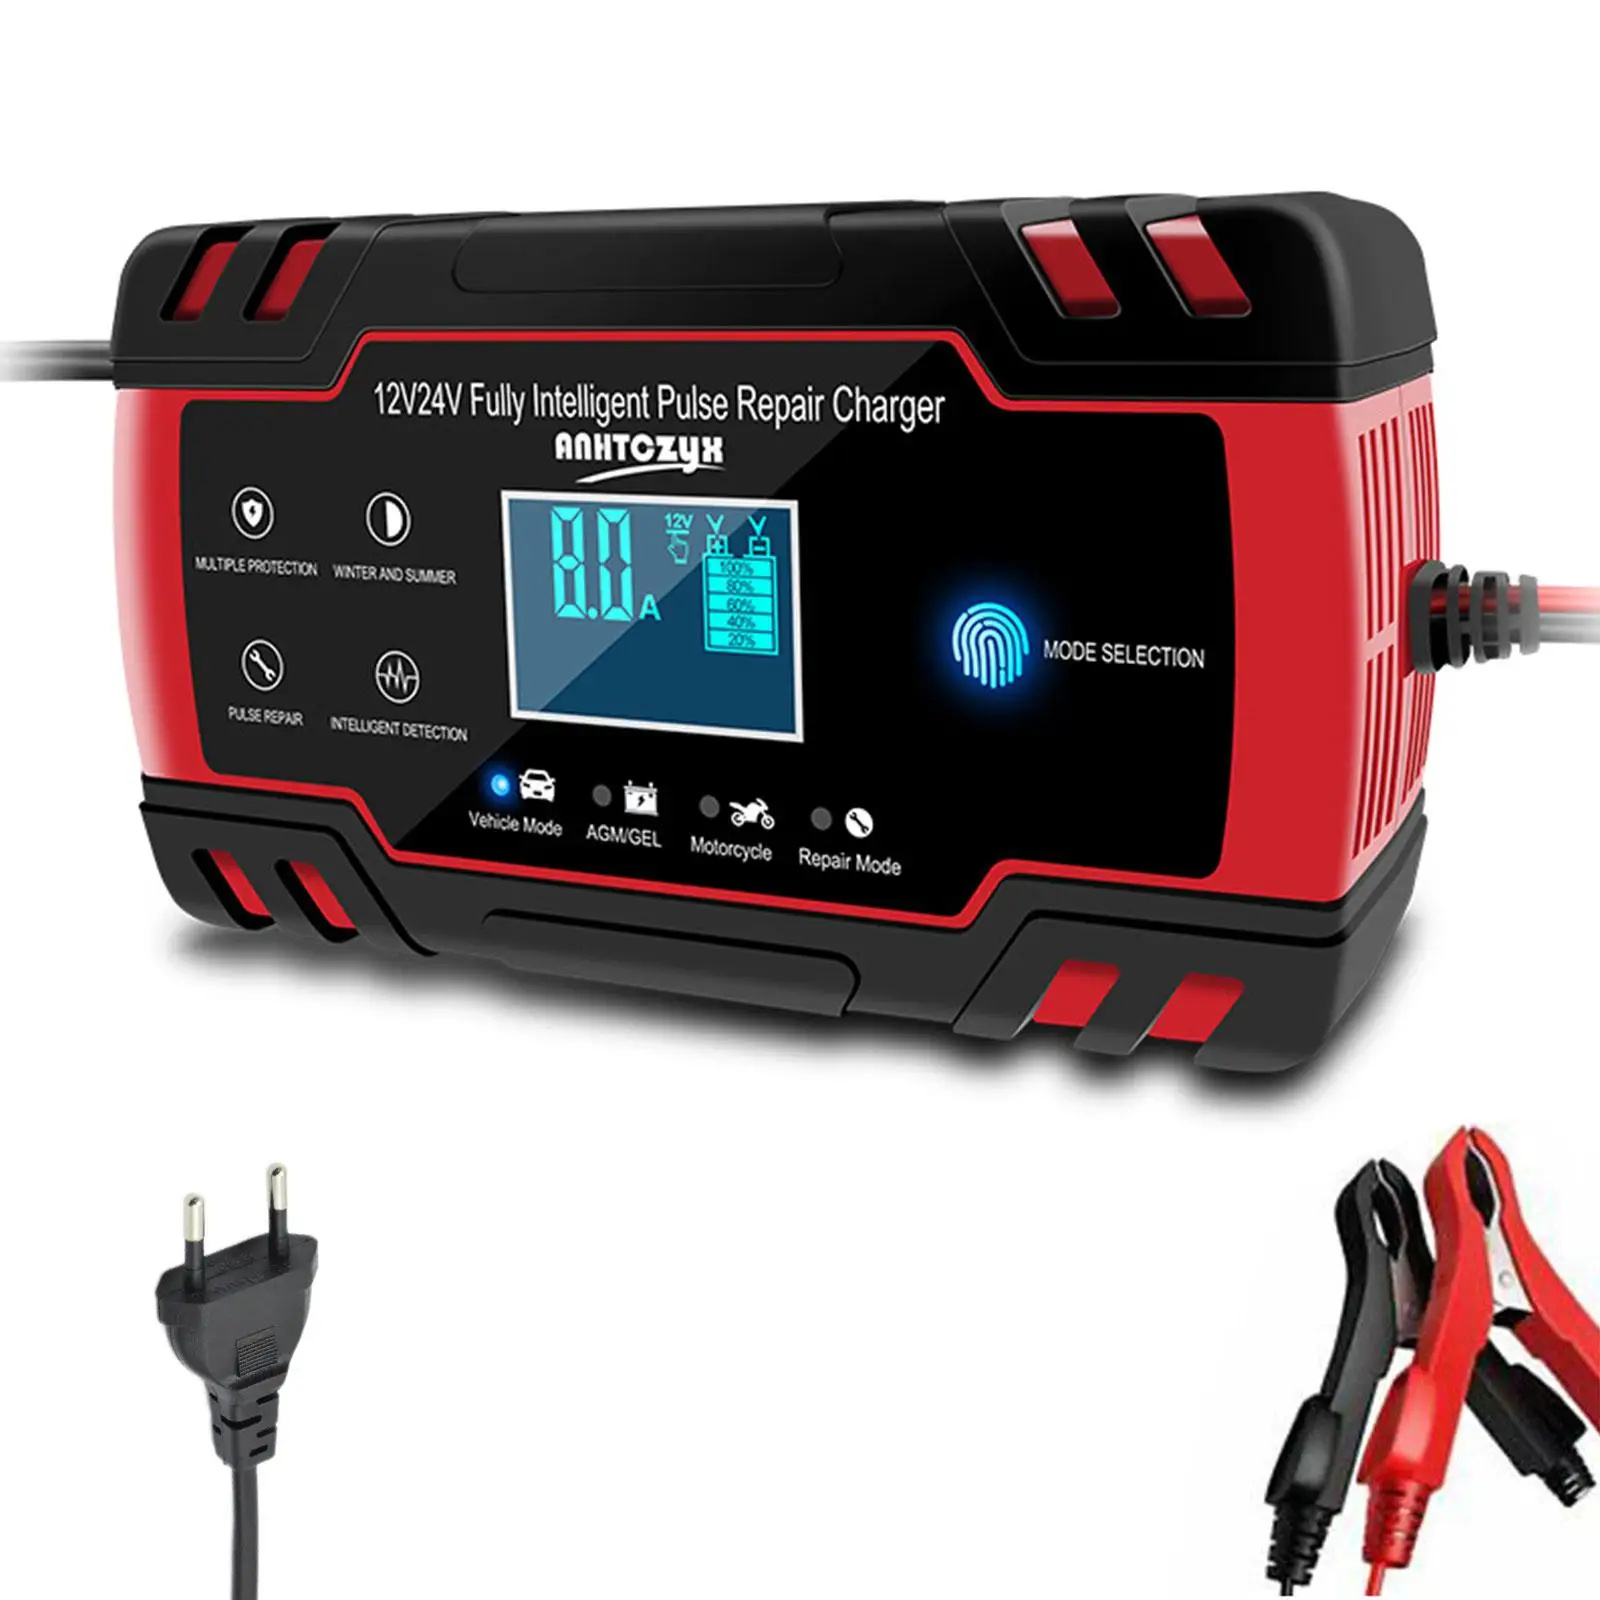 Car Battery Charger 12/24V 4/8A Screen Pulse Repair LCD Fast Power Charging Wet Dry Lead Acid Digital LCD Display